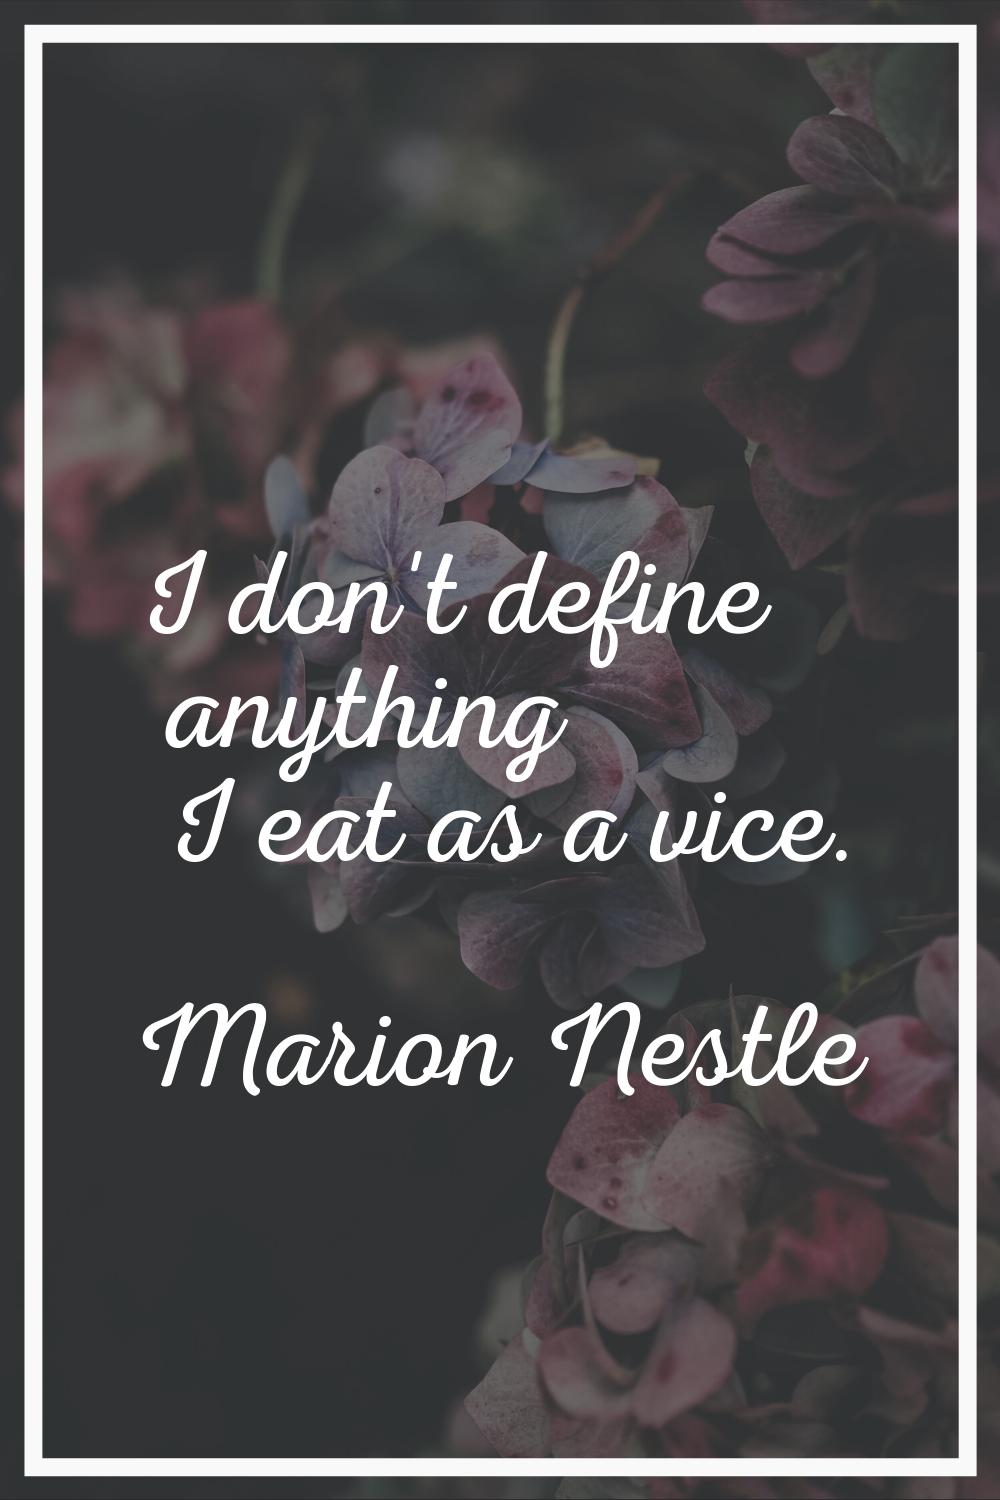 I don't define anything I eat as a vice.